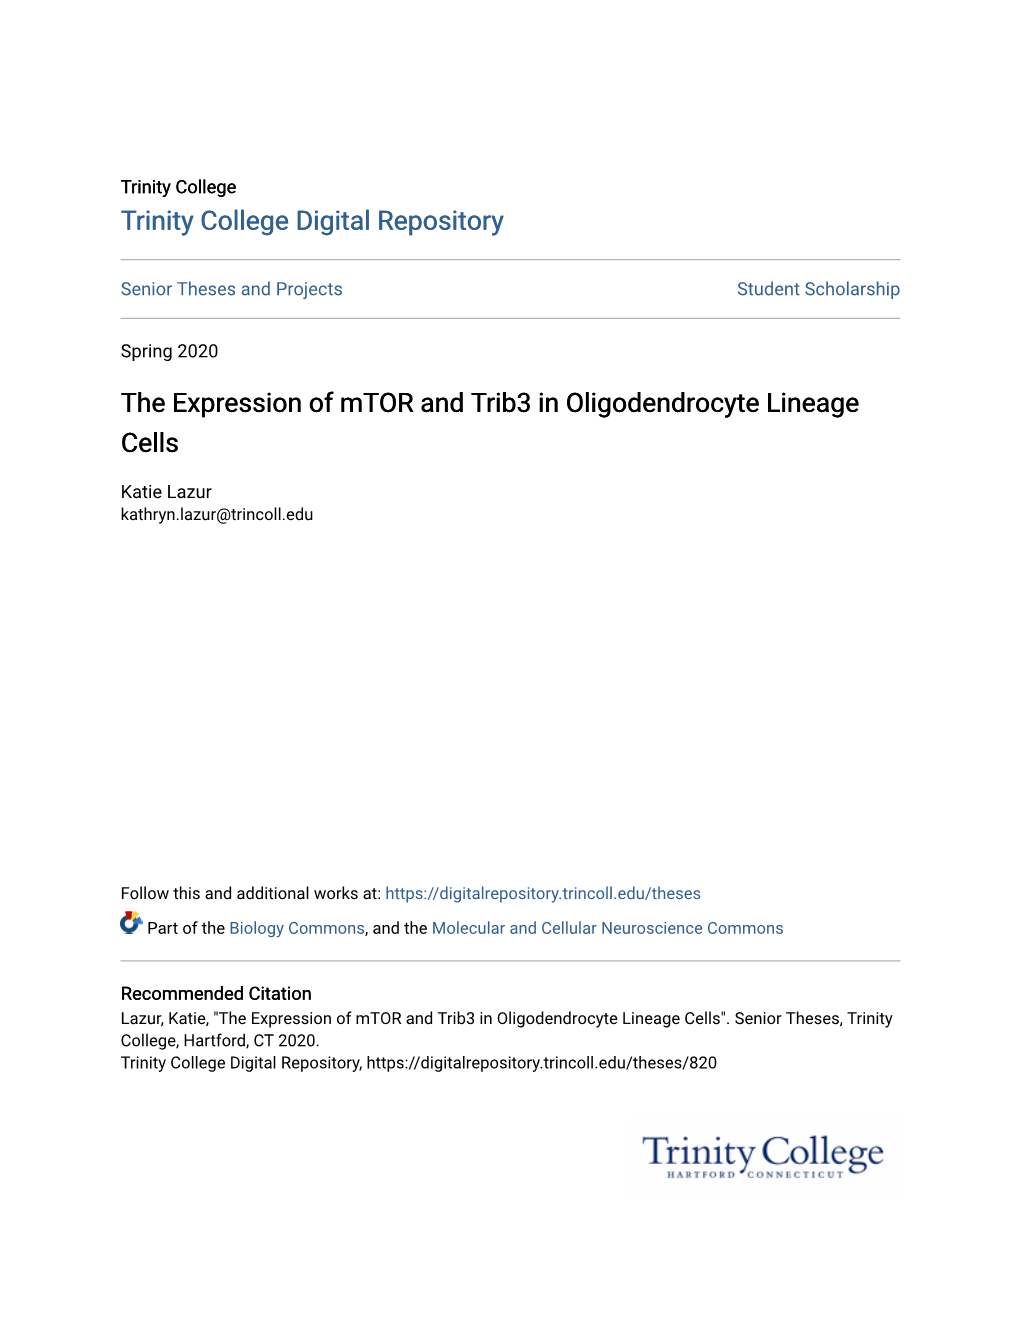 The Expression of Mtor and Trib3 in Oligodendrocyte Lineage Cells